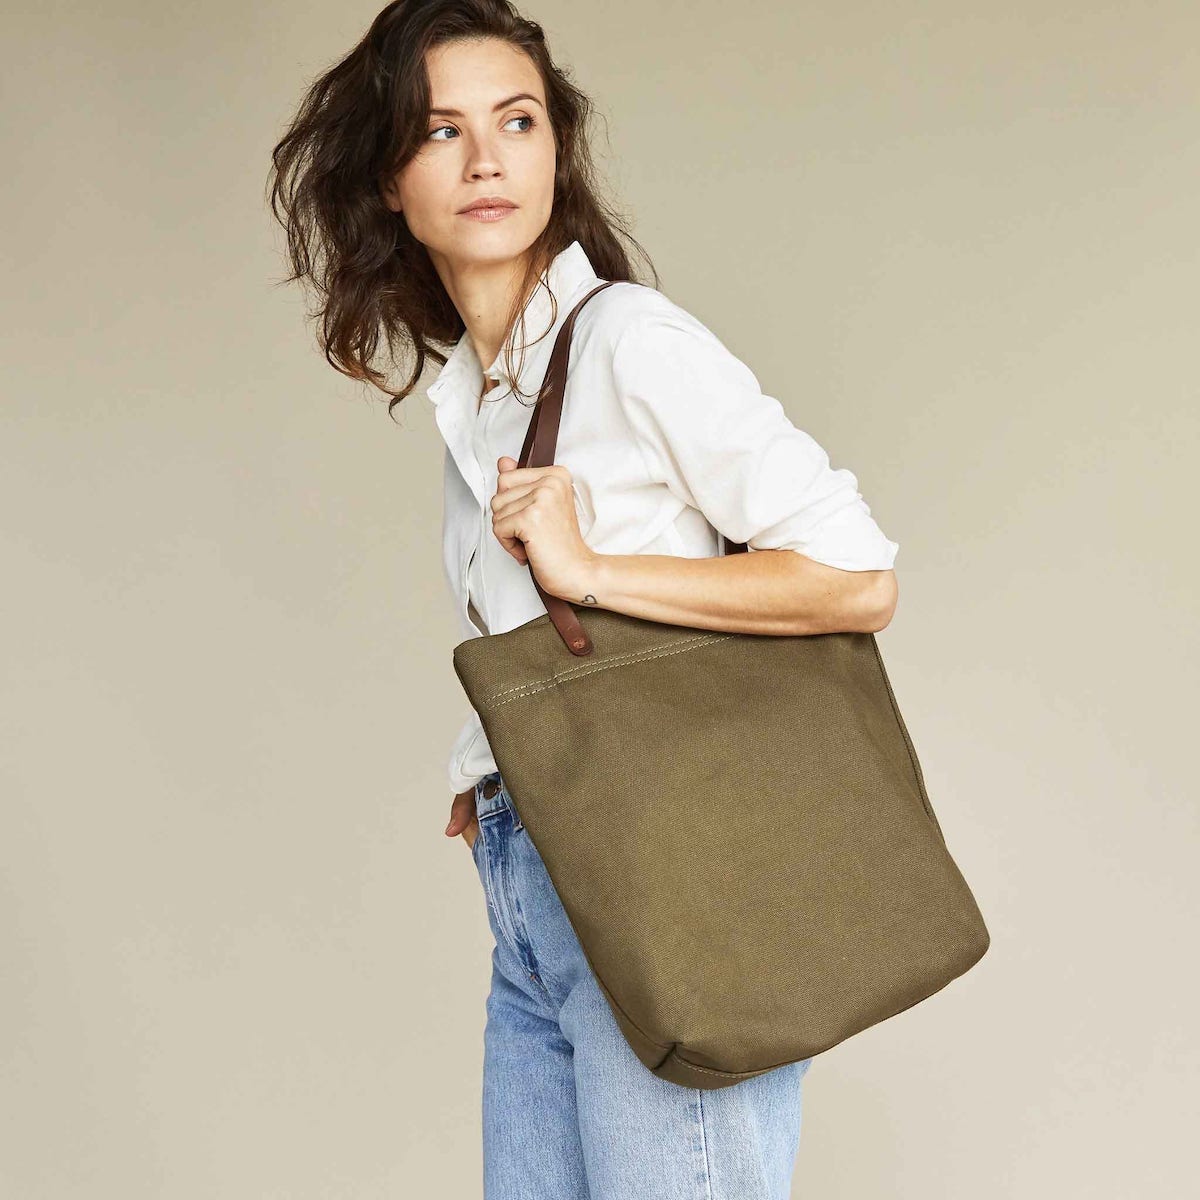 Madewell Transport Bag Comparison Small Medium and Large Tote